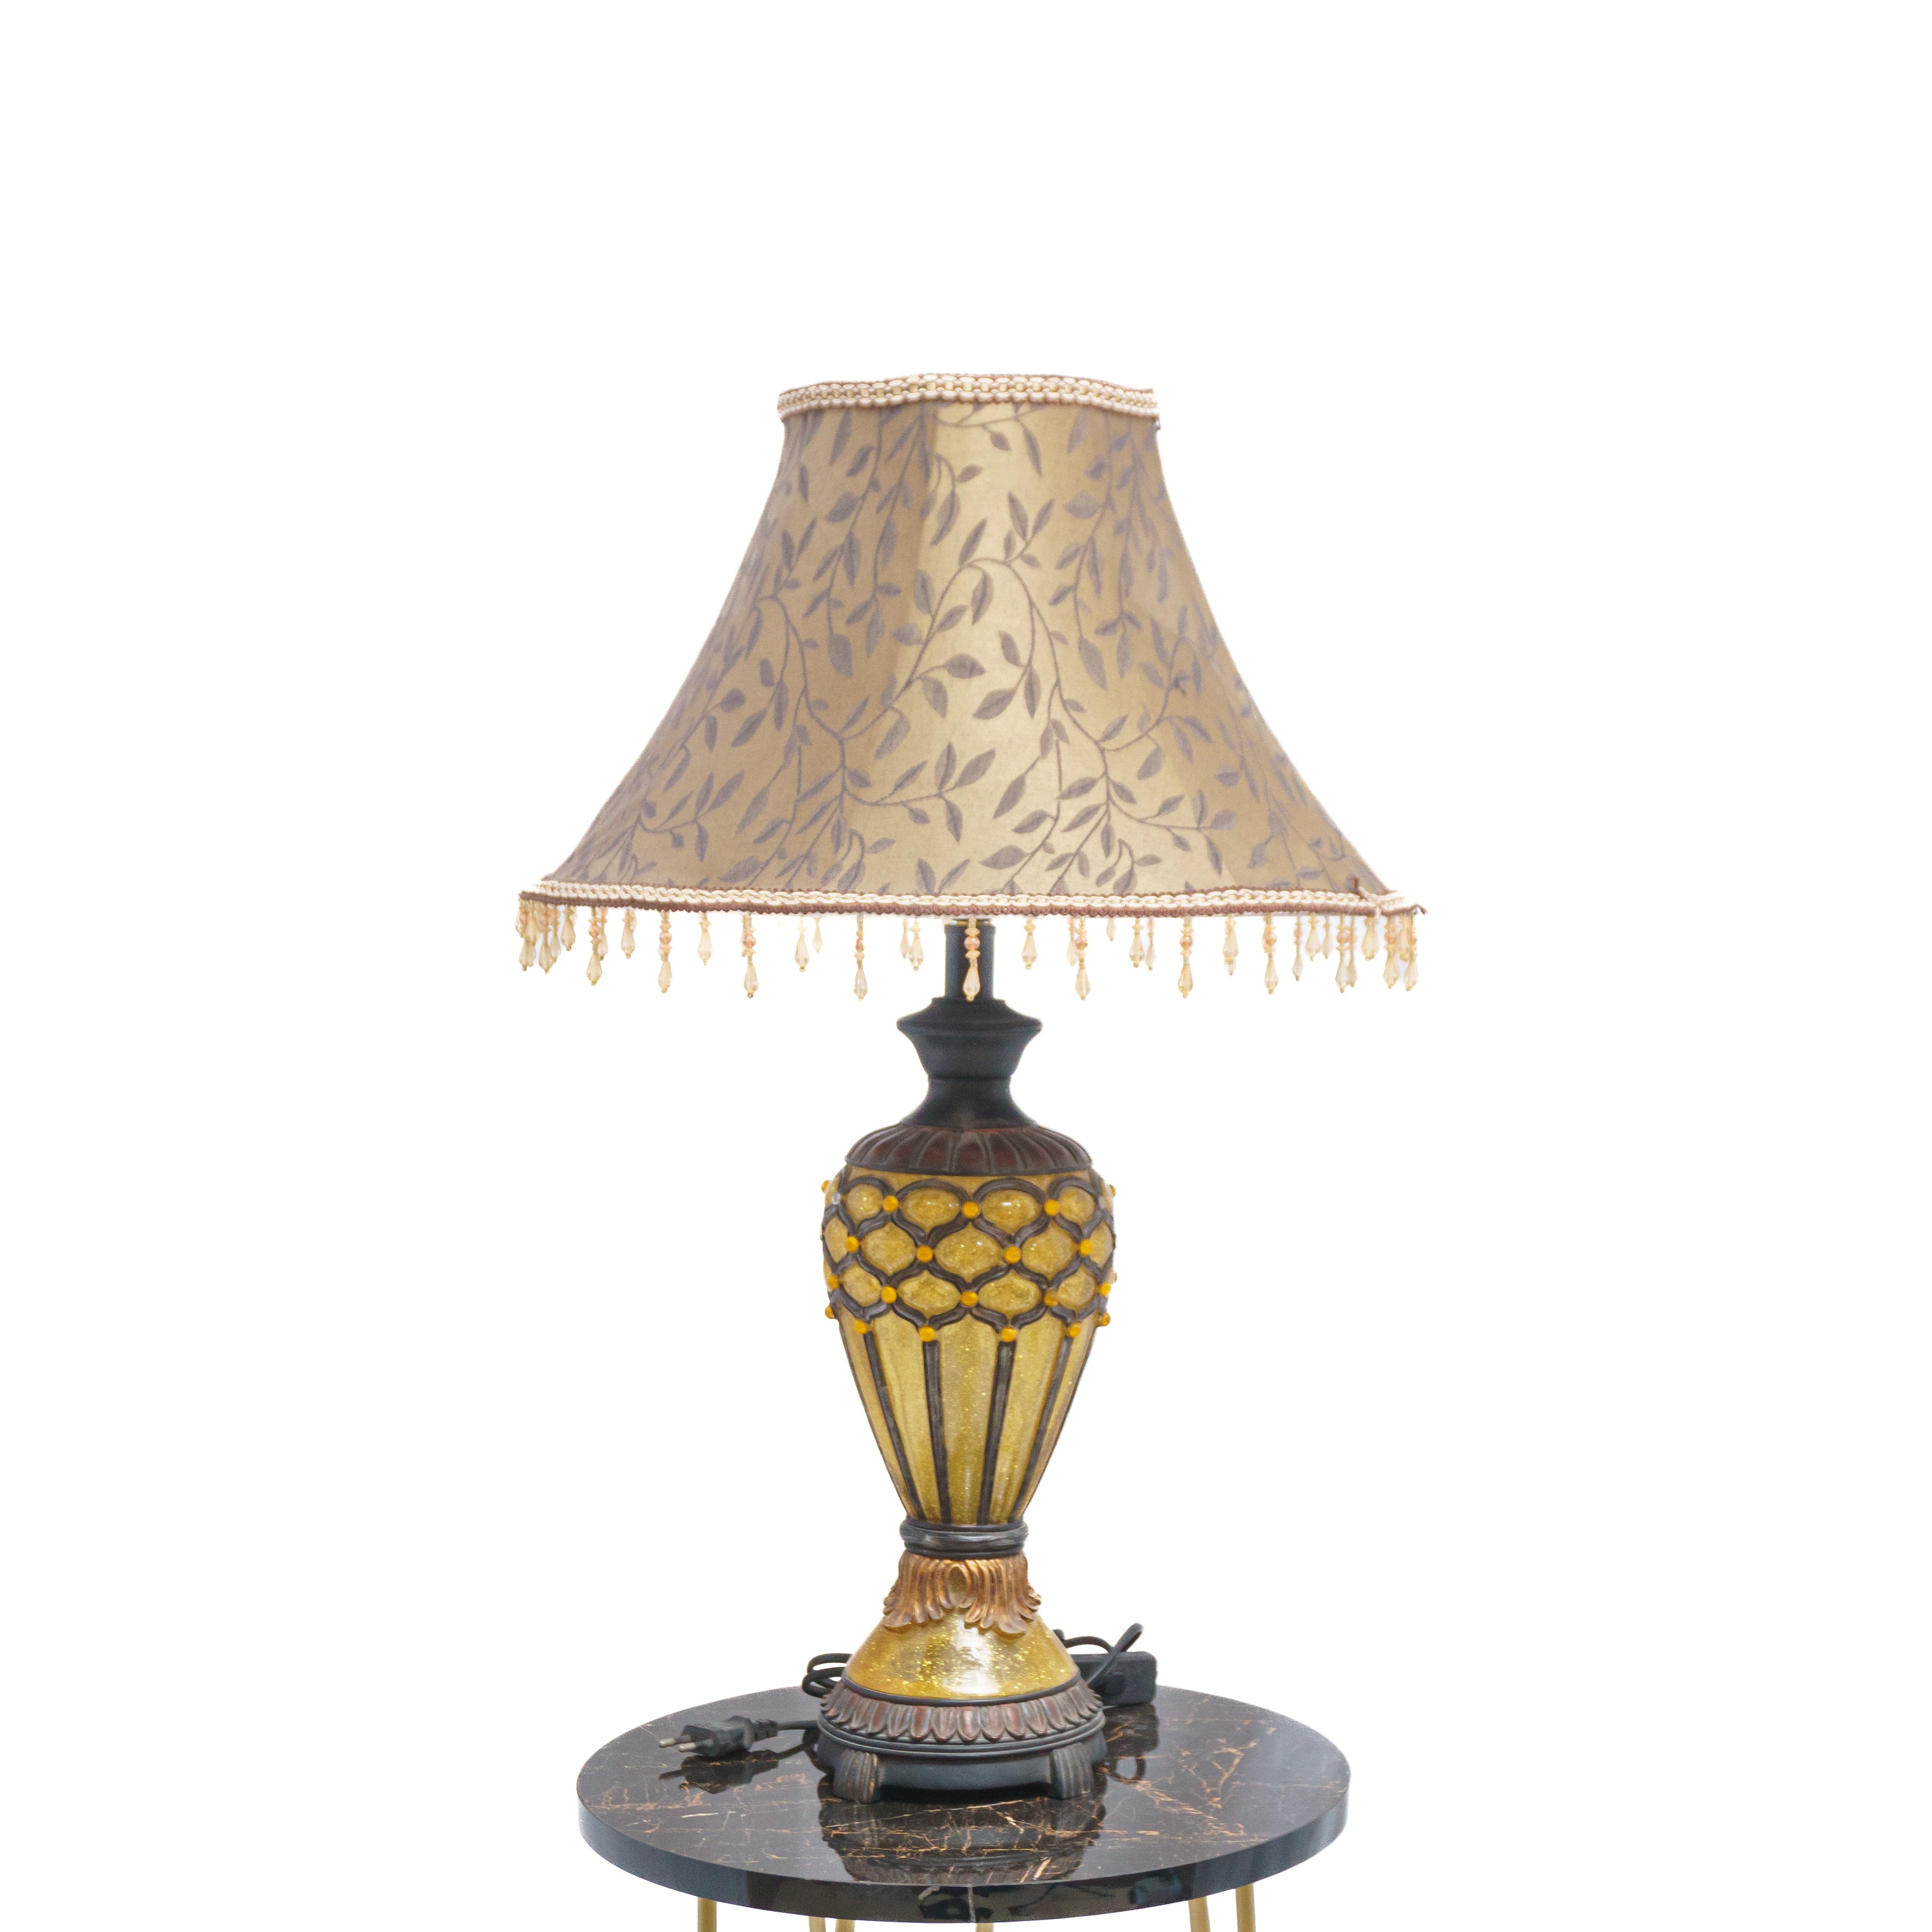 Royal Golden Bell Style Table Lamp with Leaf Design Lamp Shade and Ornate Lamp Stand